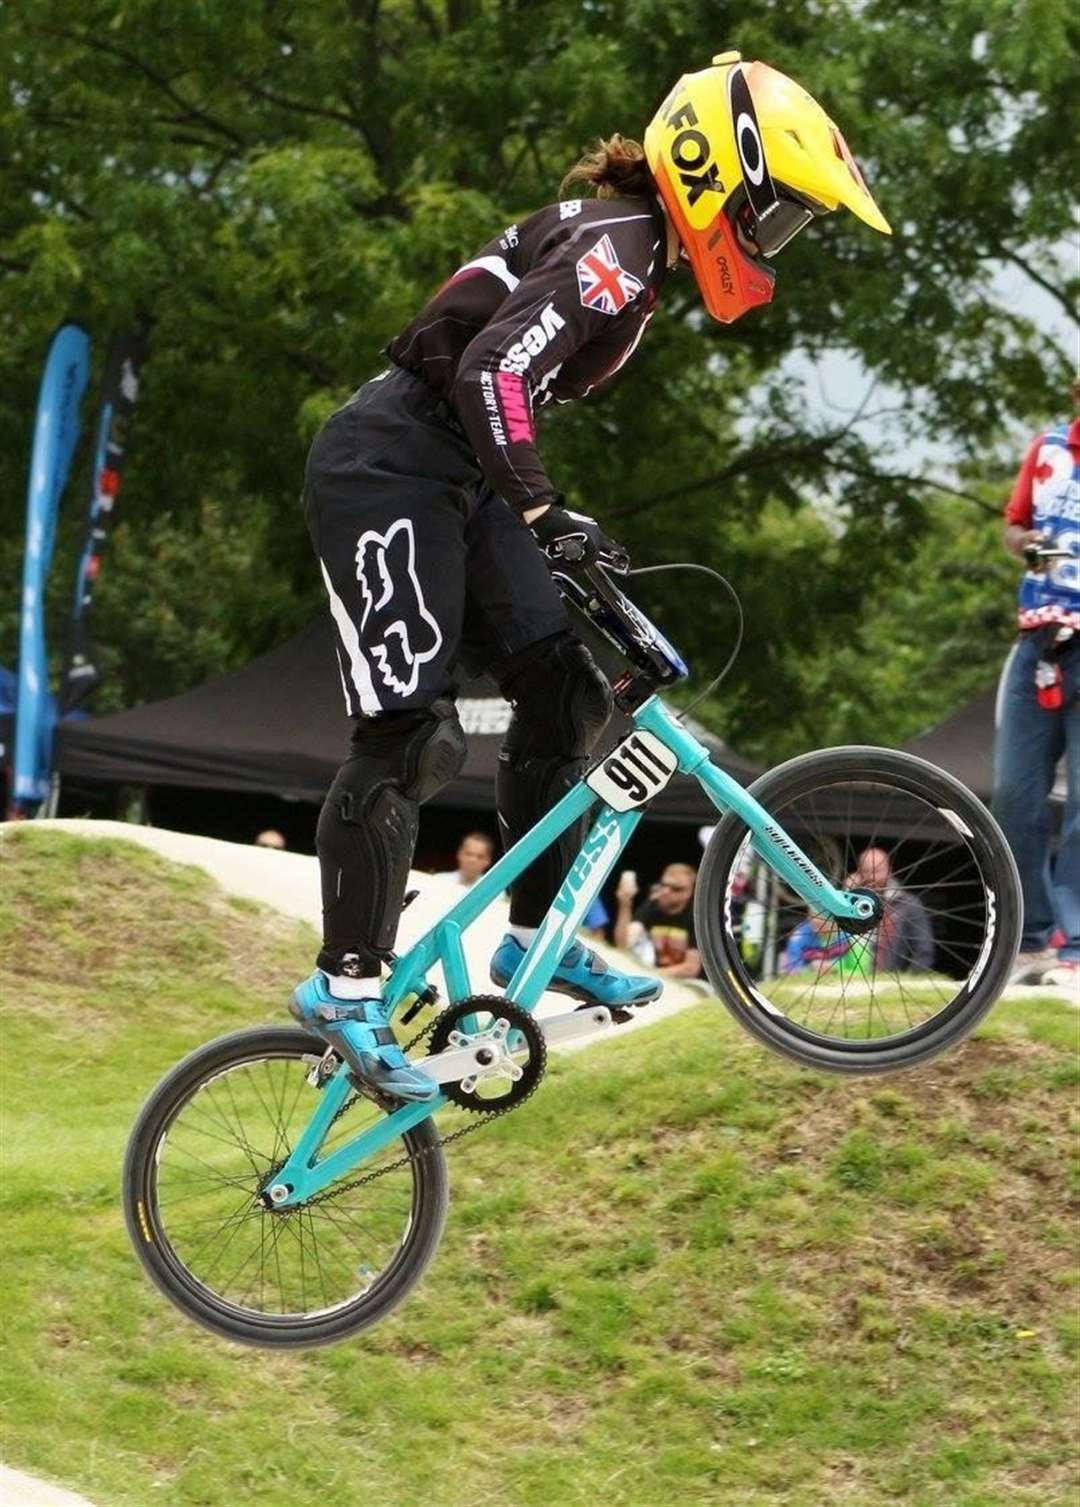 BMX racer Bethany Shriever took gold in the Tokyo Olympics. She was in action at the Cyclopark before heading to the games last summer. Picture: Cyclopark